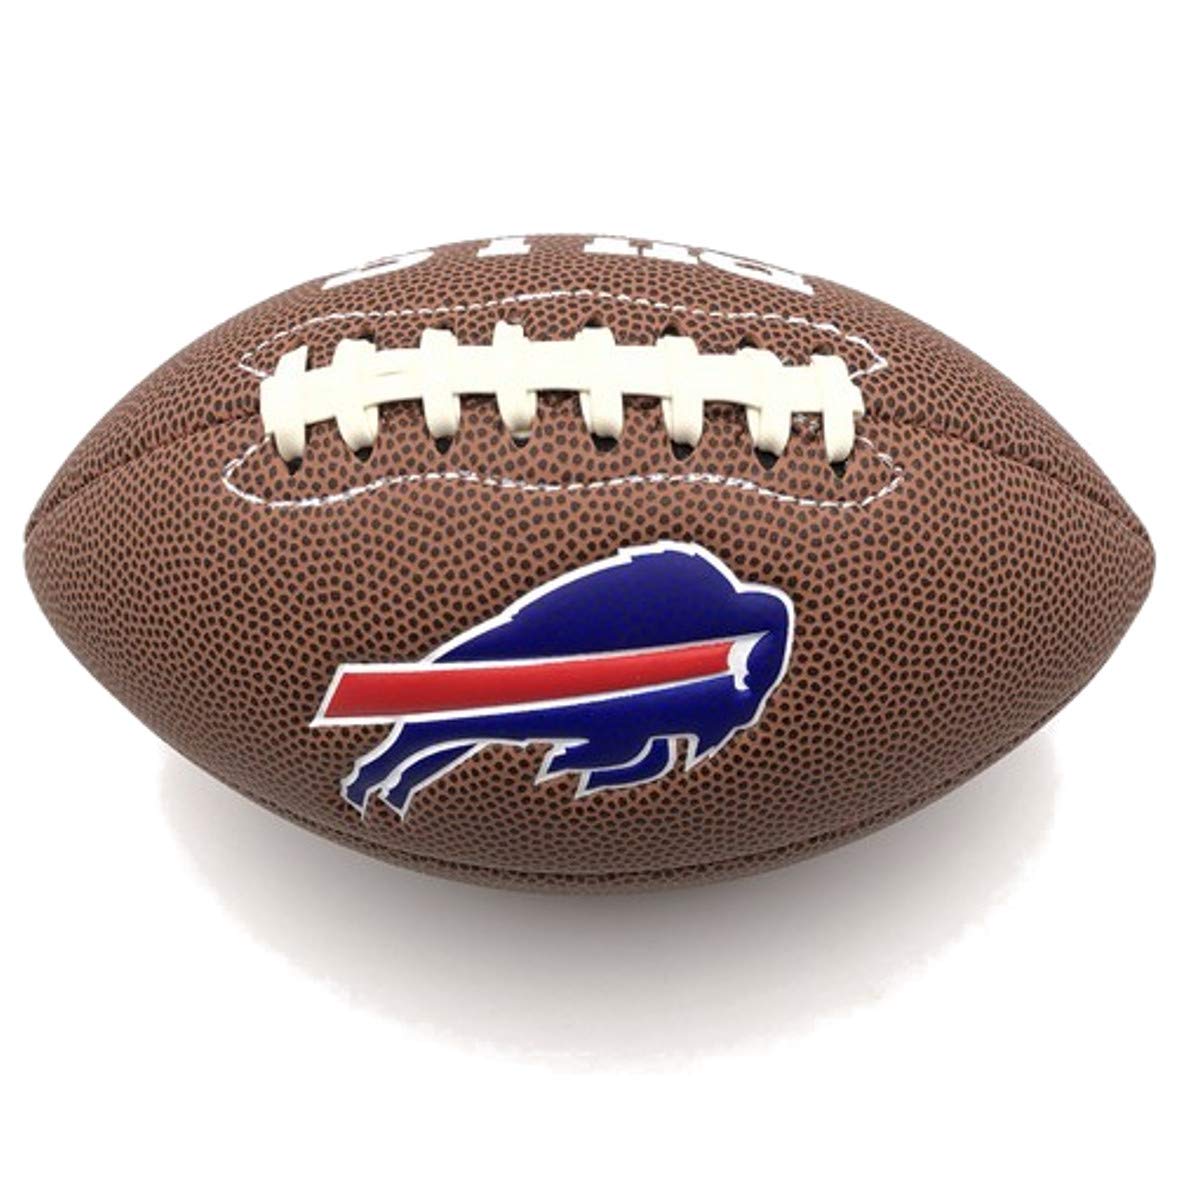 Jarden Sports Licensing Official National Football League Fan Shop Authentic NFL AIR IT Out Mini Youth Football. Great for Pick up Game with The Kids.